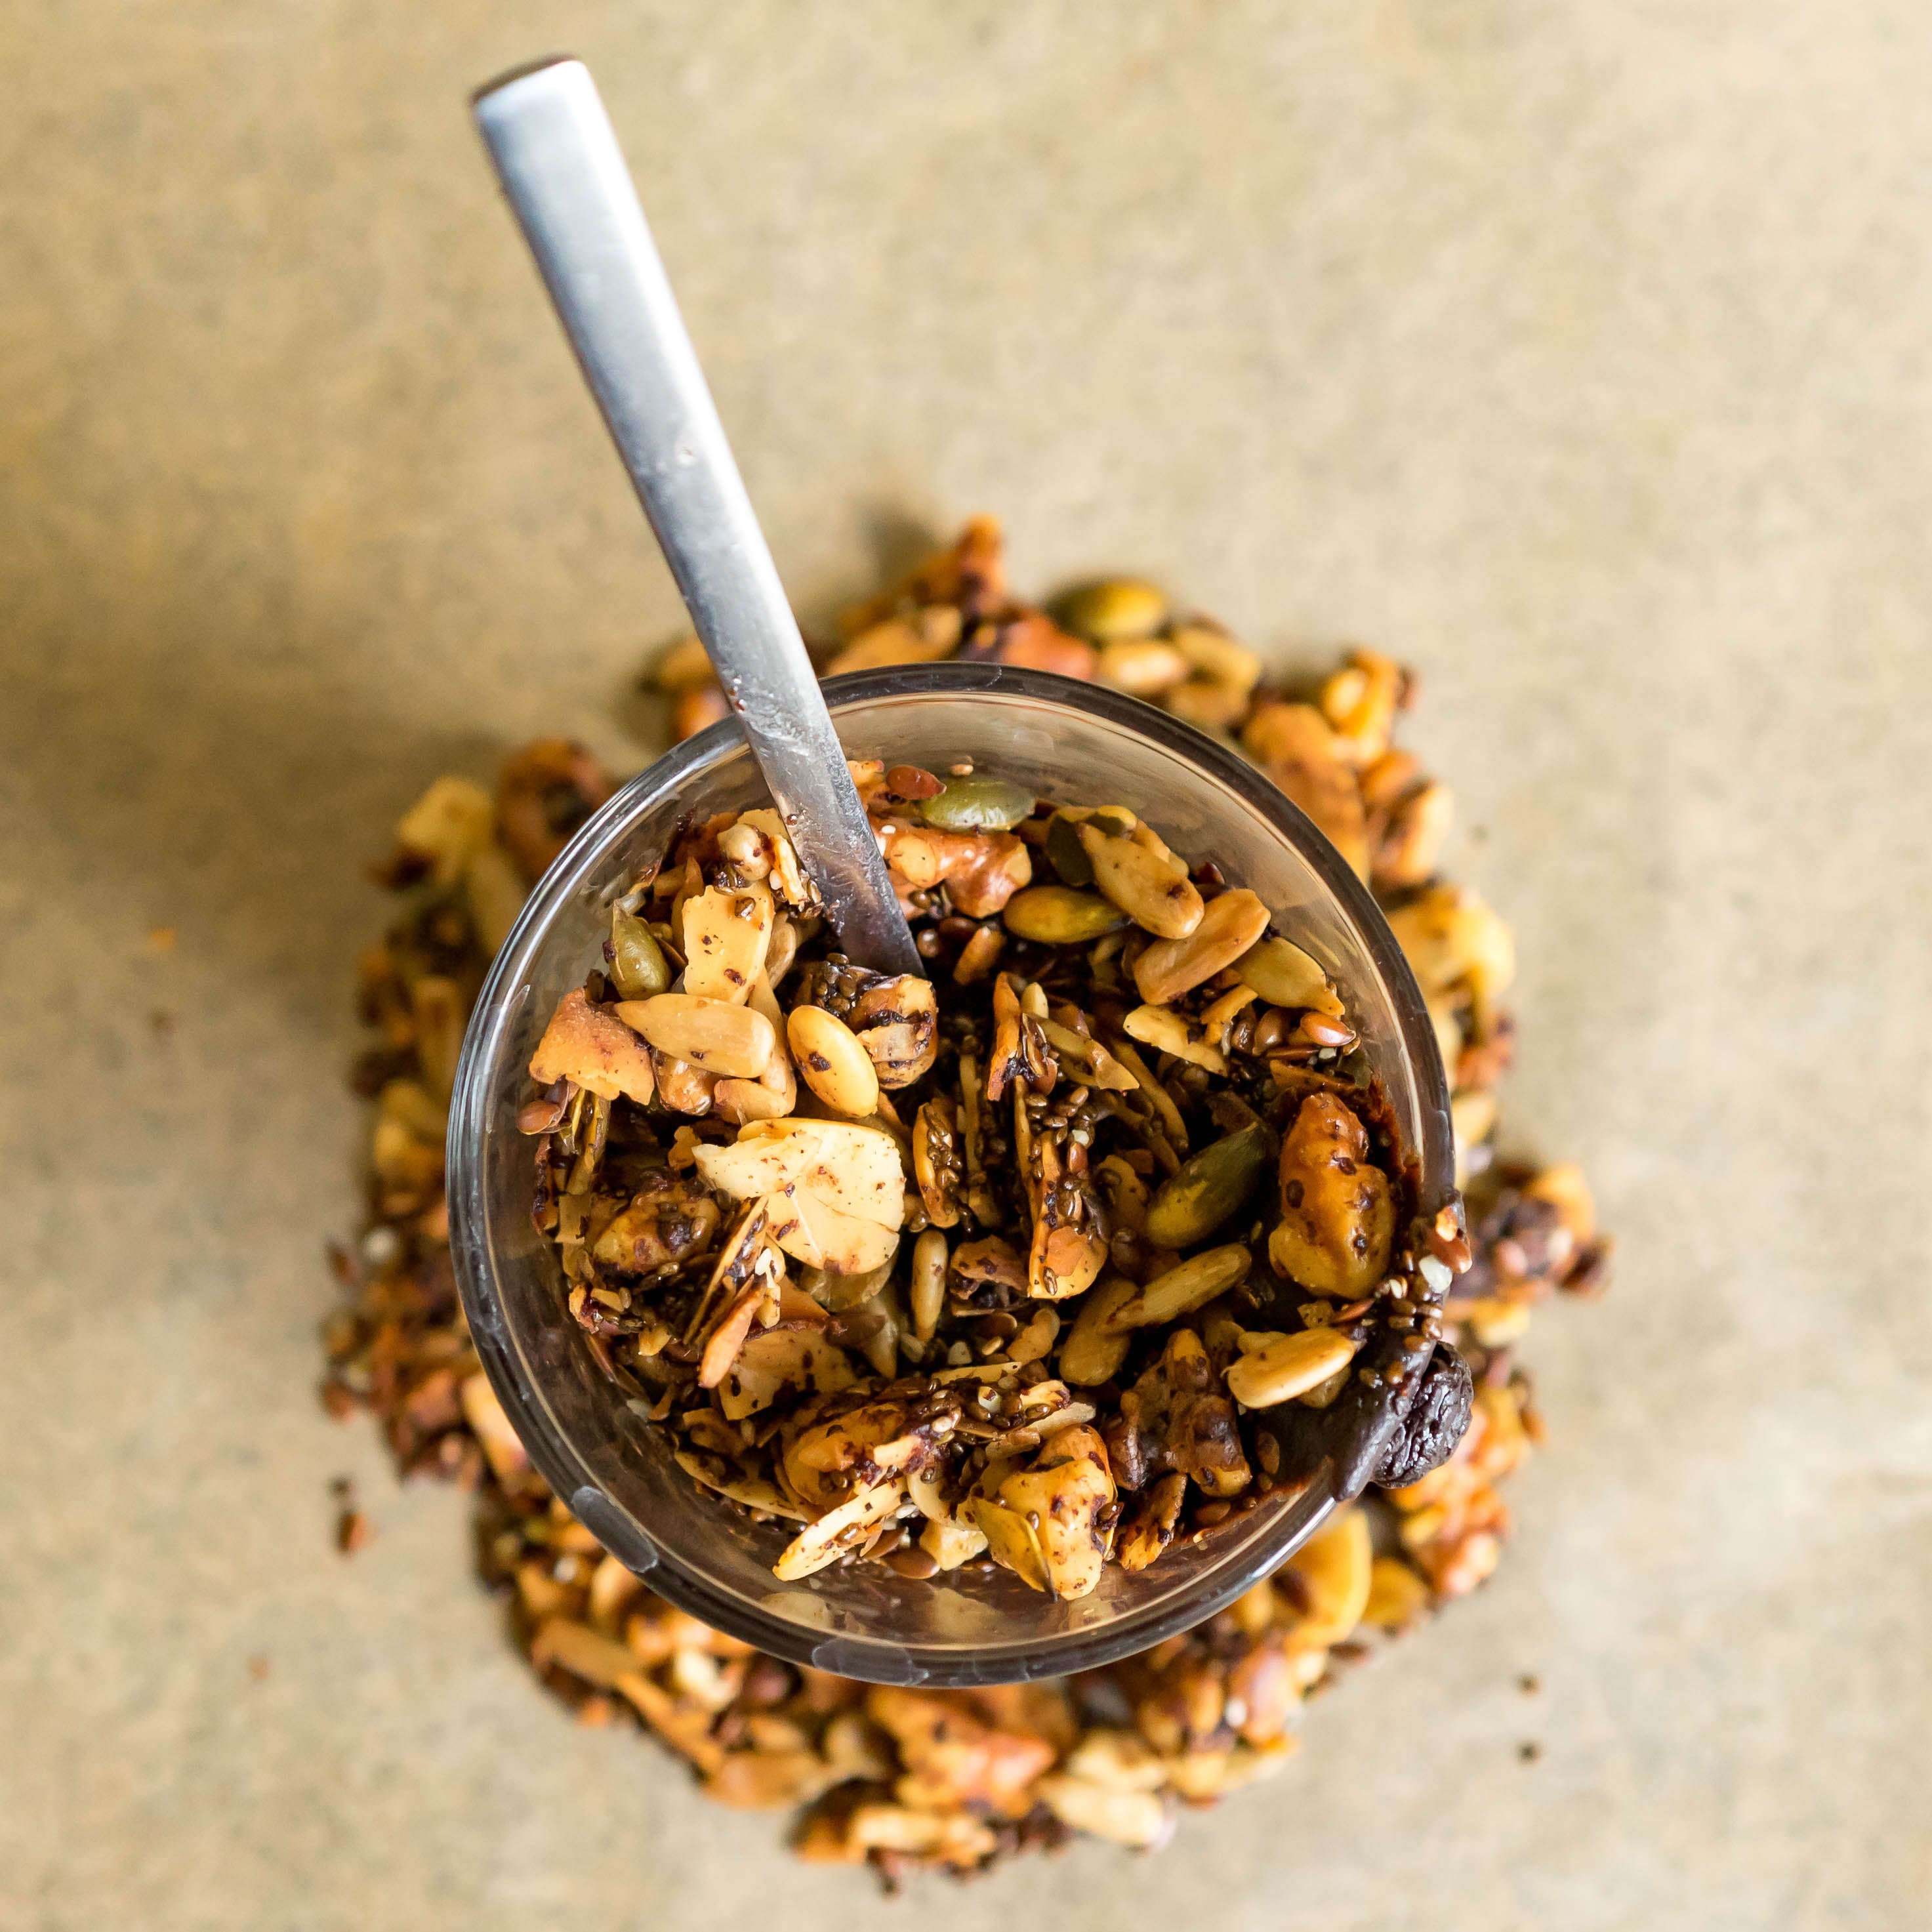 Crunchy granola made with the highest quality nuts, seeds and oils